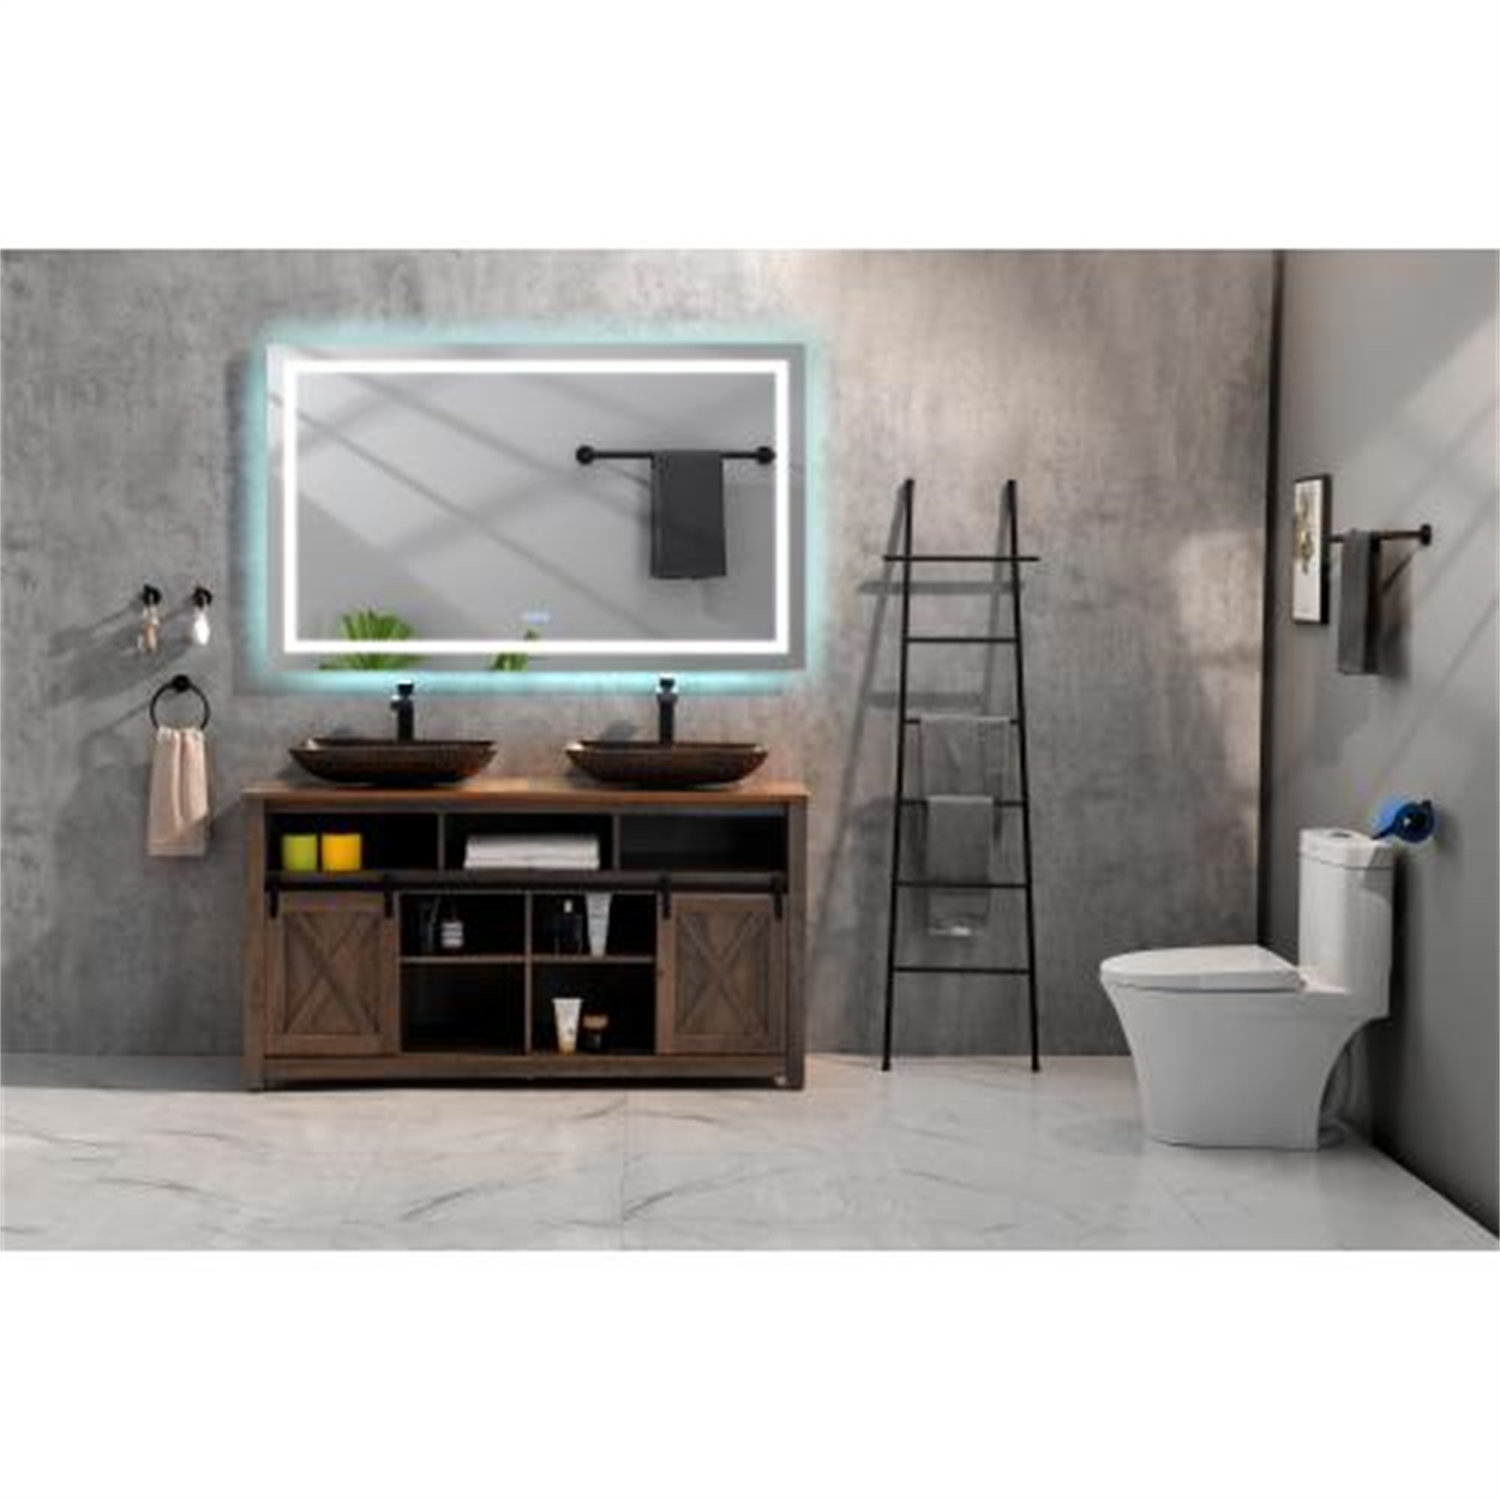 72x36 inch Frameless LED Single Bathroom Vanity Mirror in Polished Crystal\\n Bathroom Vanity LED Mirror with 3 Color Lights Mirror for Bathroom Wall 60 Inch Smart Lighted Vanity Mirrors Dimma